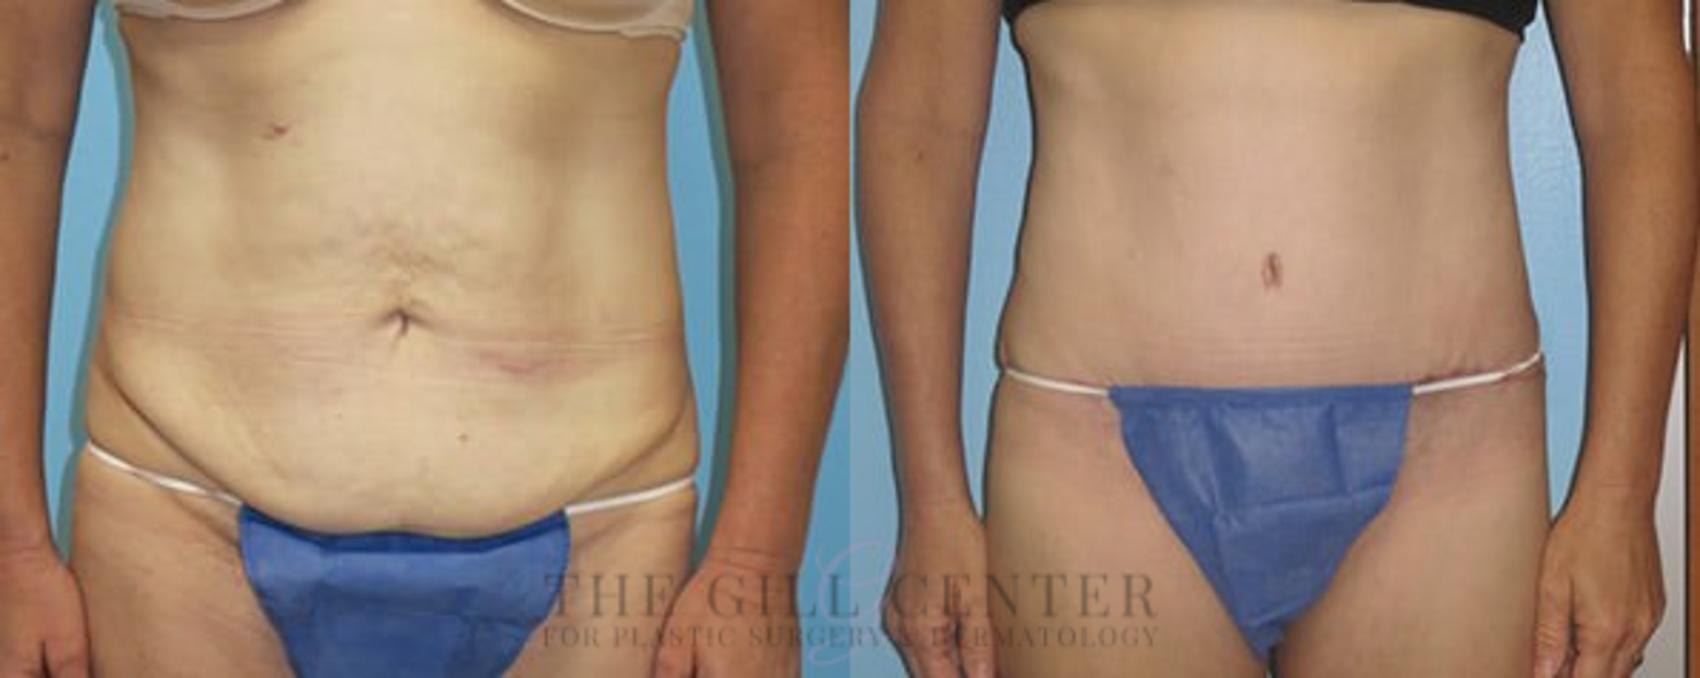 Tummy Tuck Case 232 Before & After Front | The Woodlands, TX | The Gill Center for Plastic Surgery and Dermatology